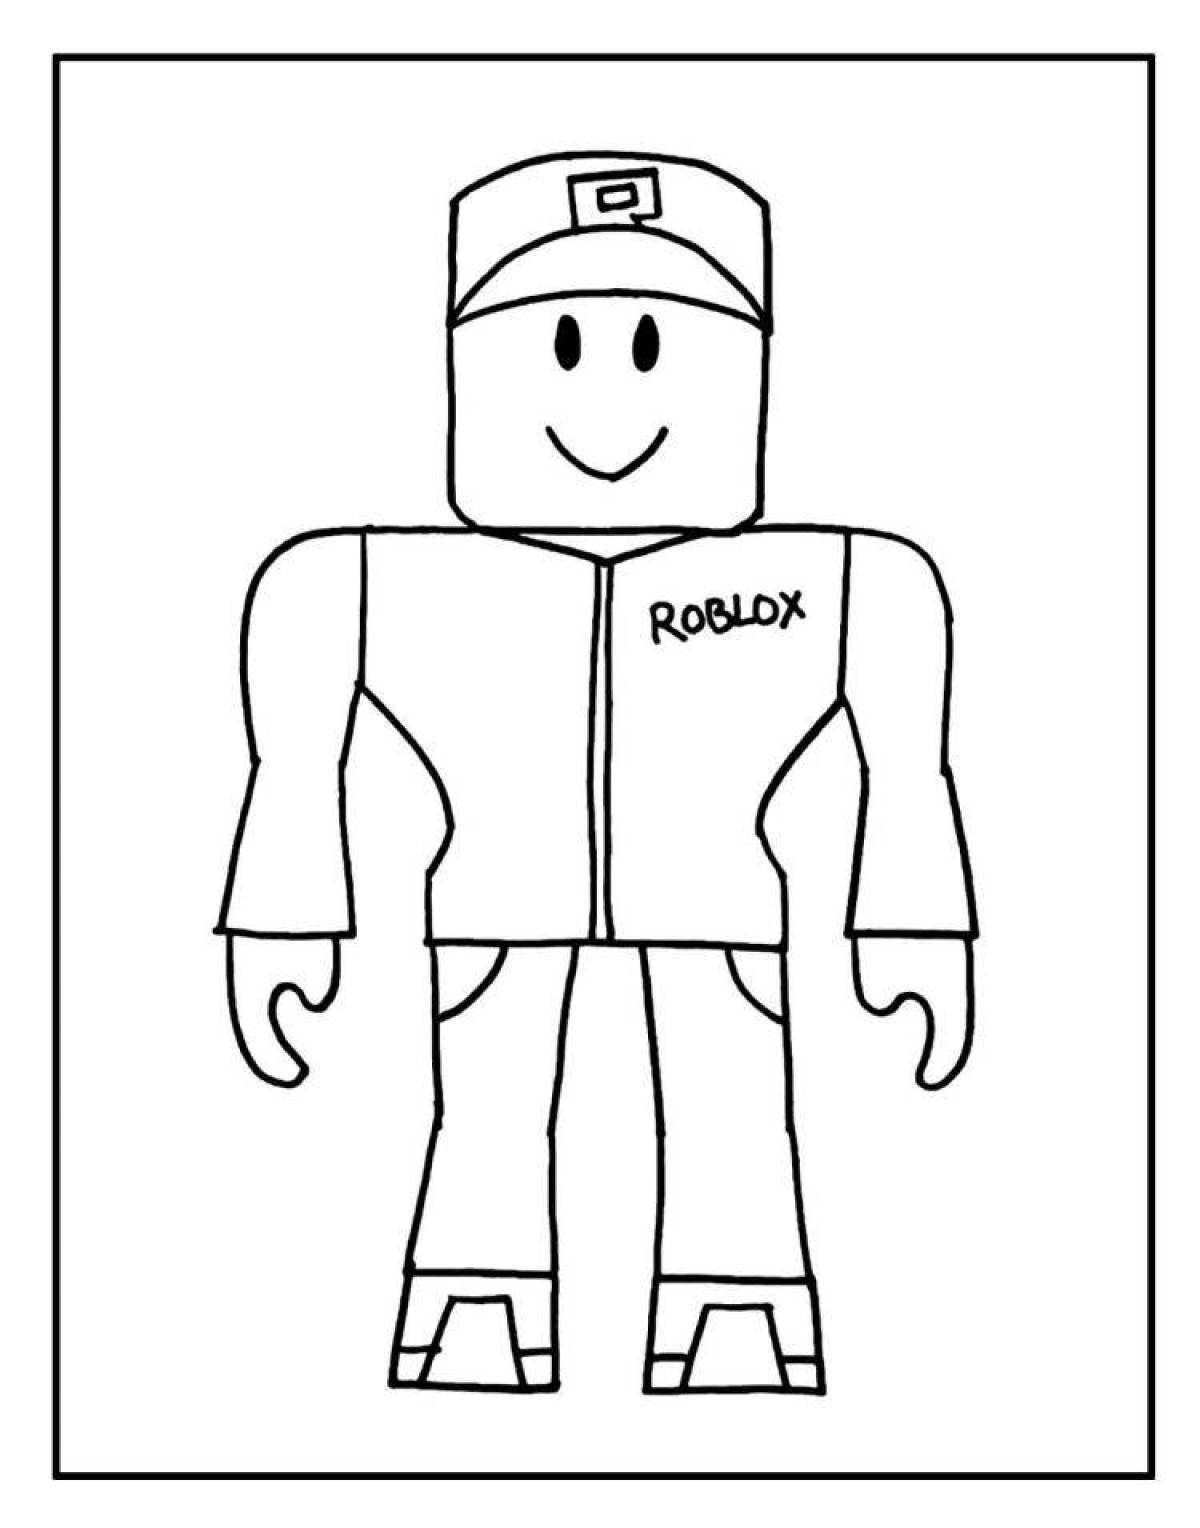 Roblox funny characters coloring page